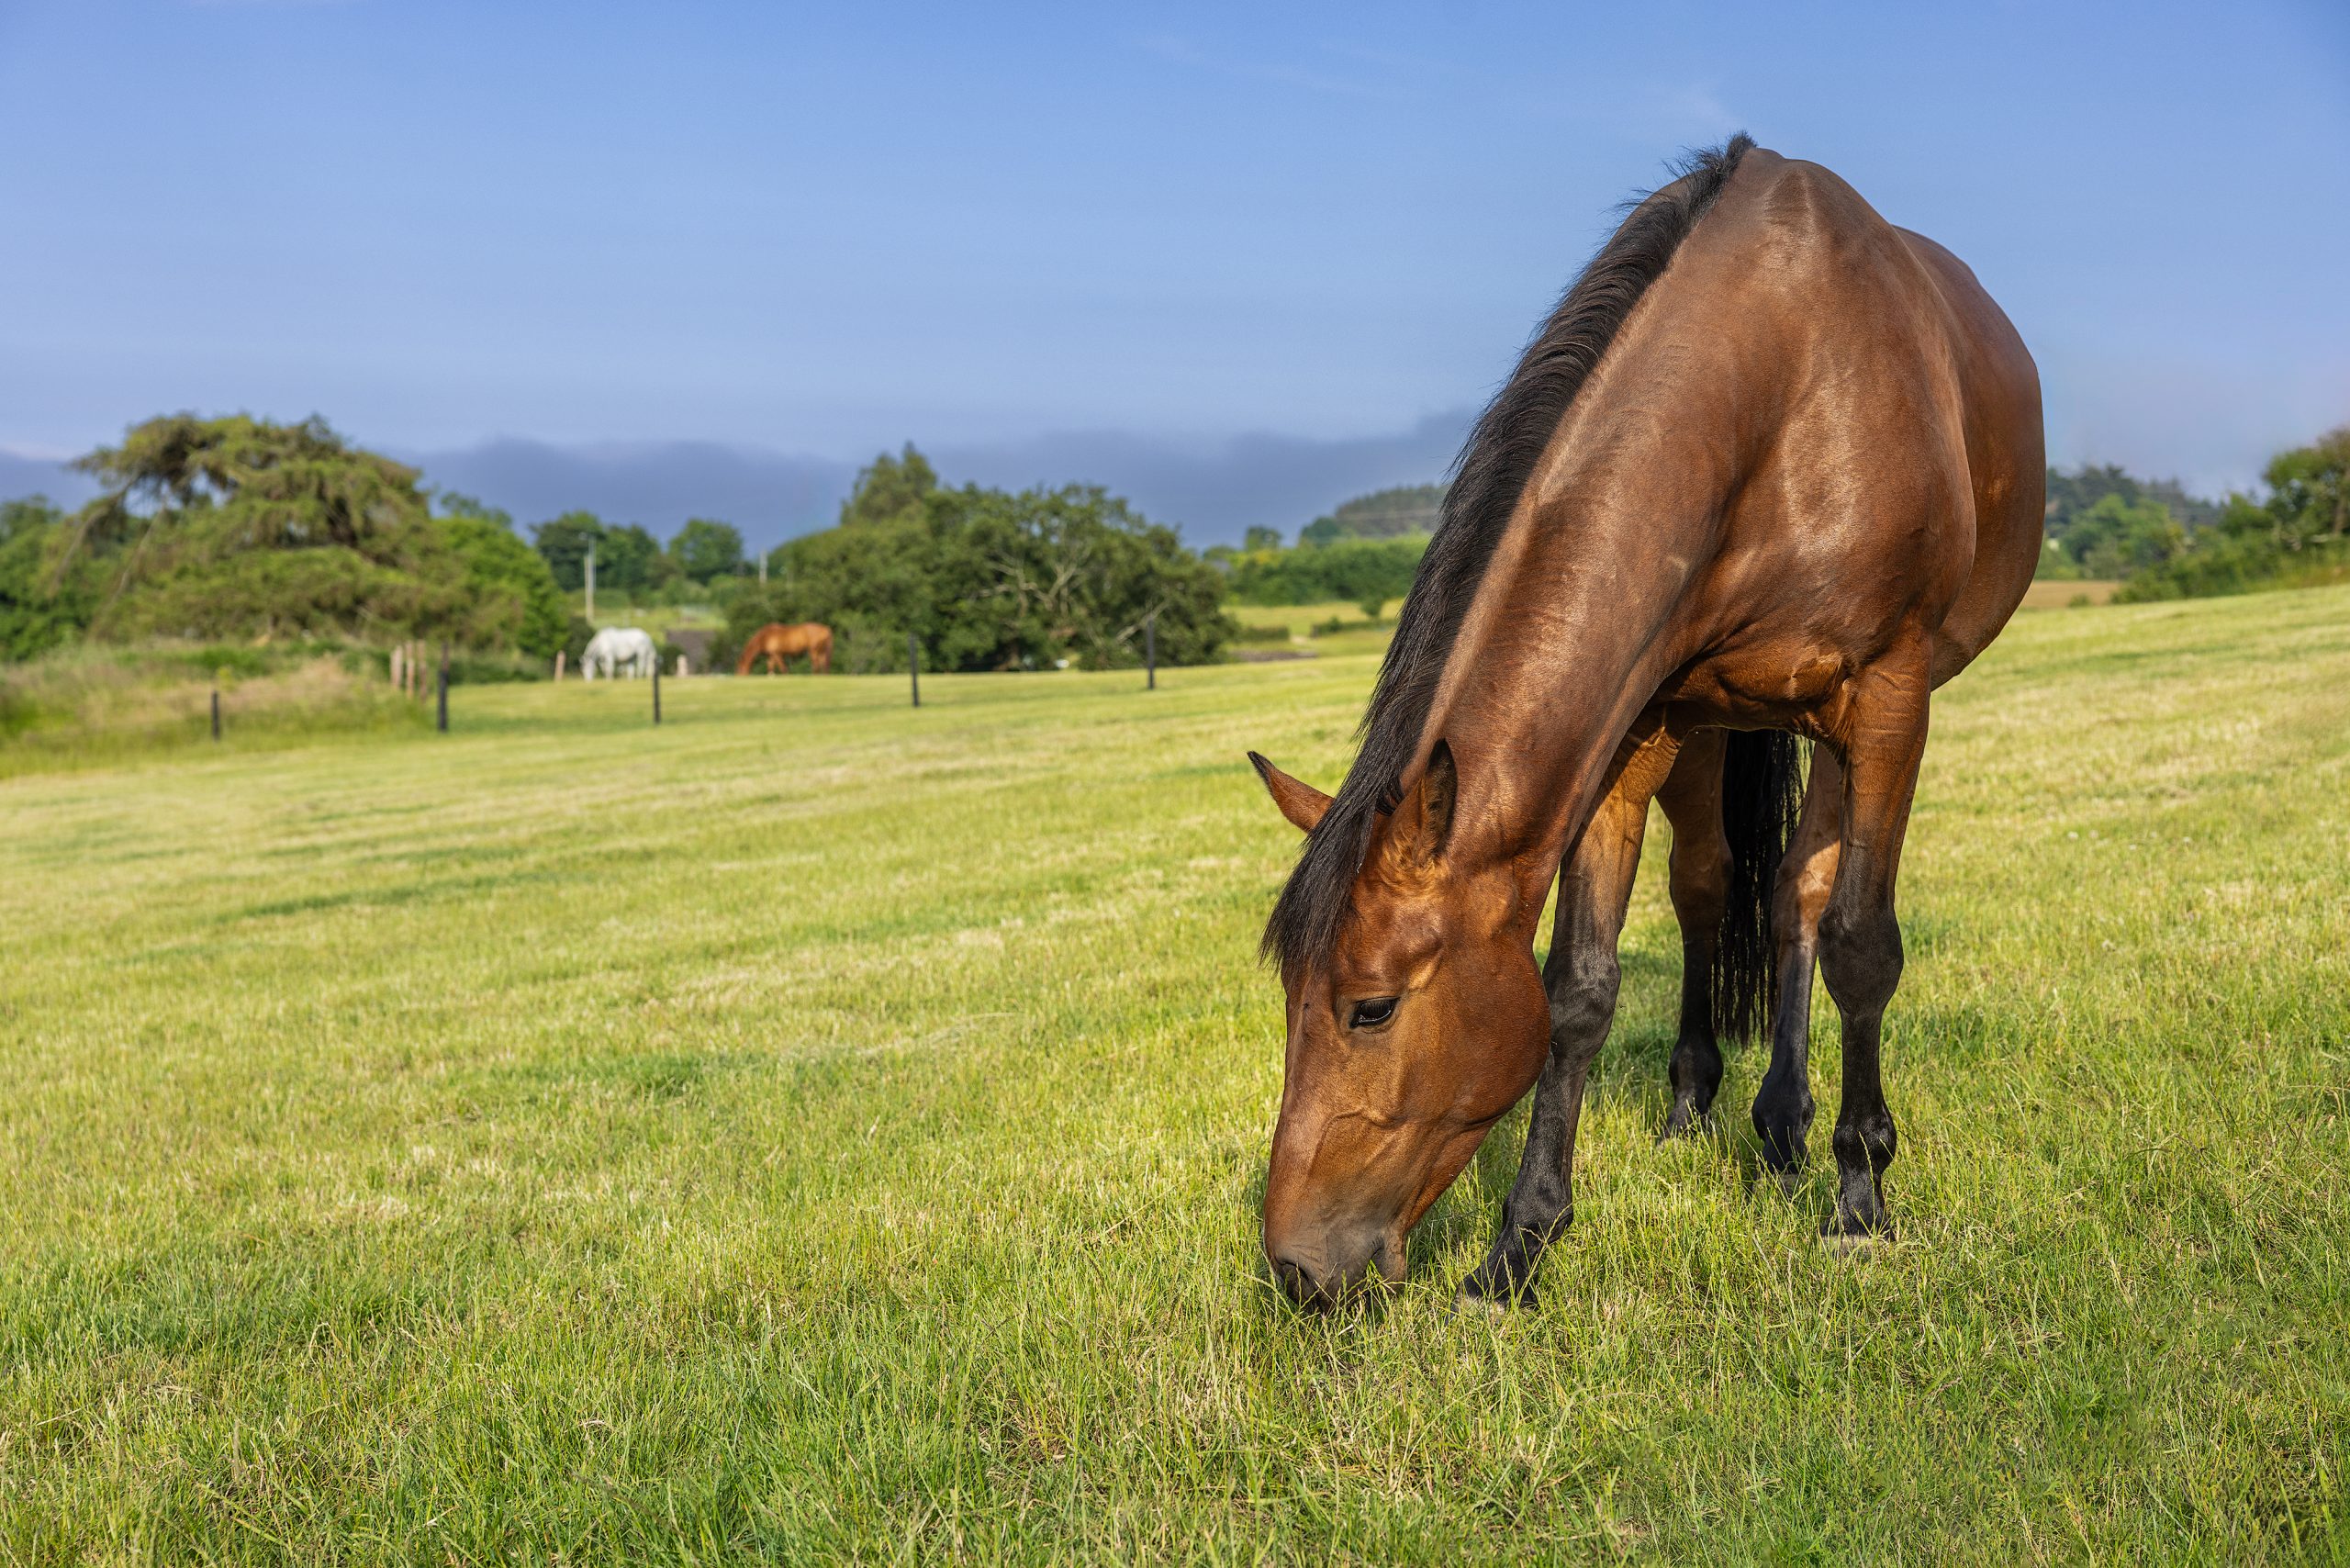 Sport Horses grazing in paddock. Copyright Dulra Photography